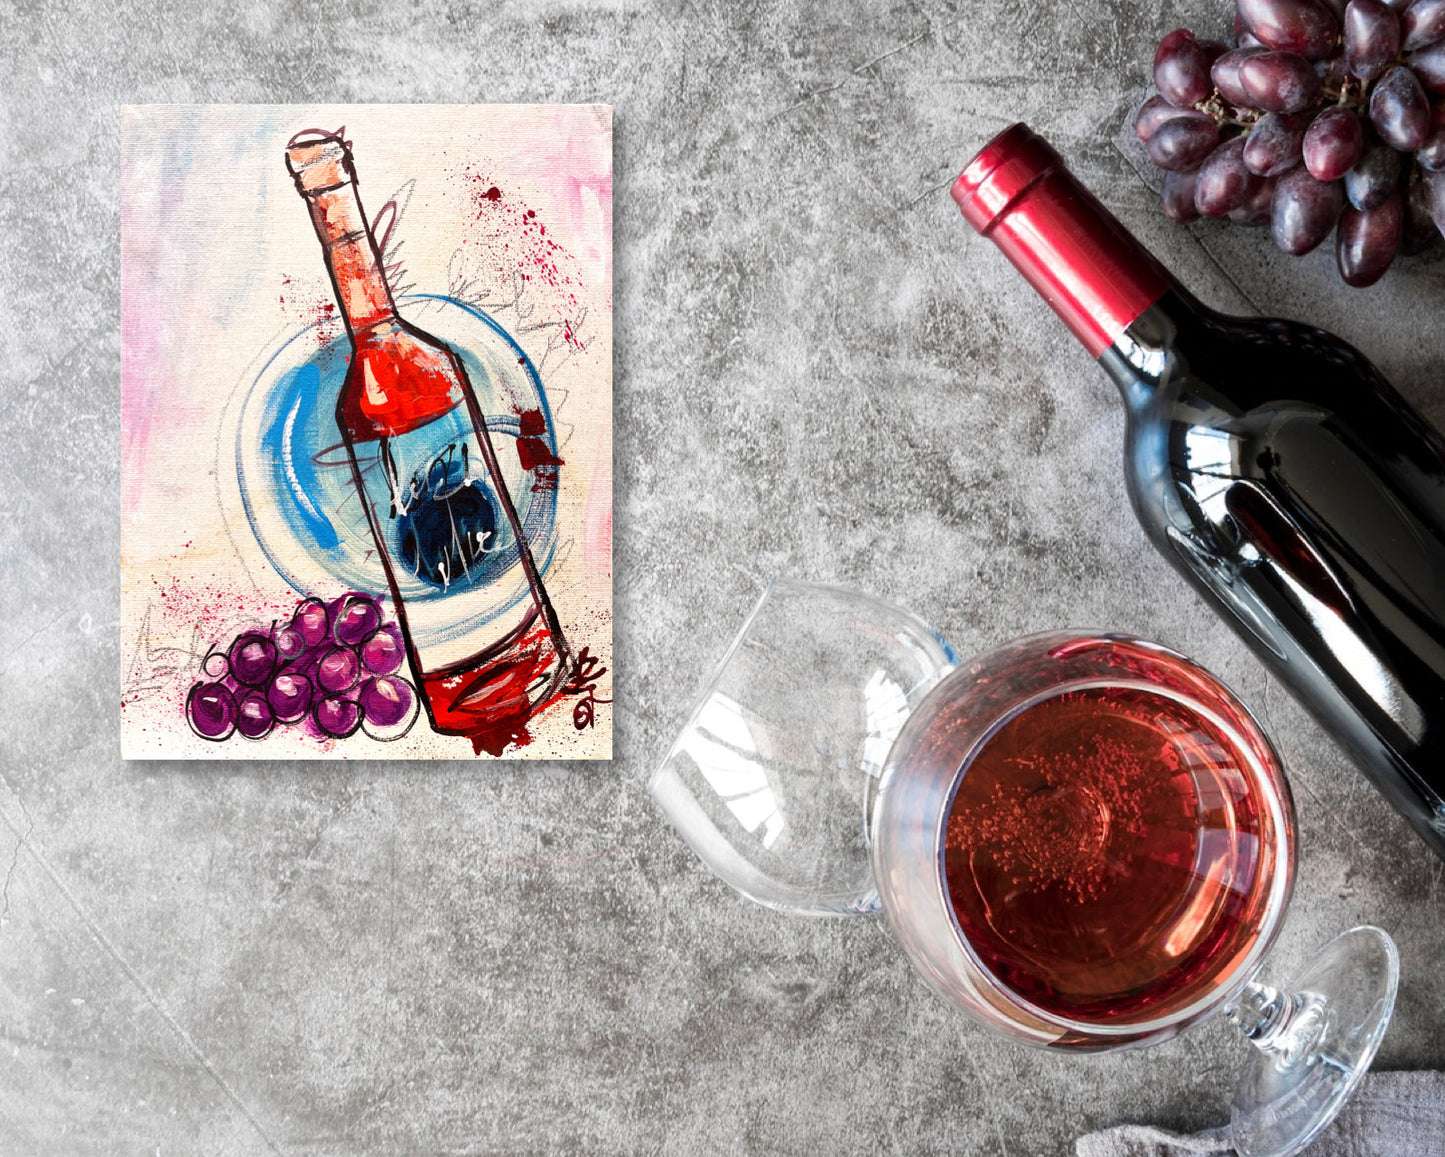 10 Minute Speed Painting of Wine Bottle